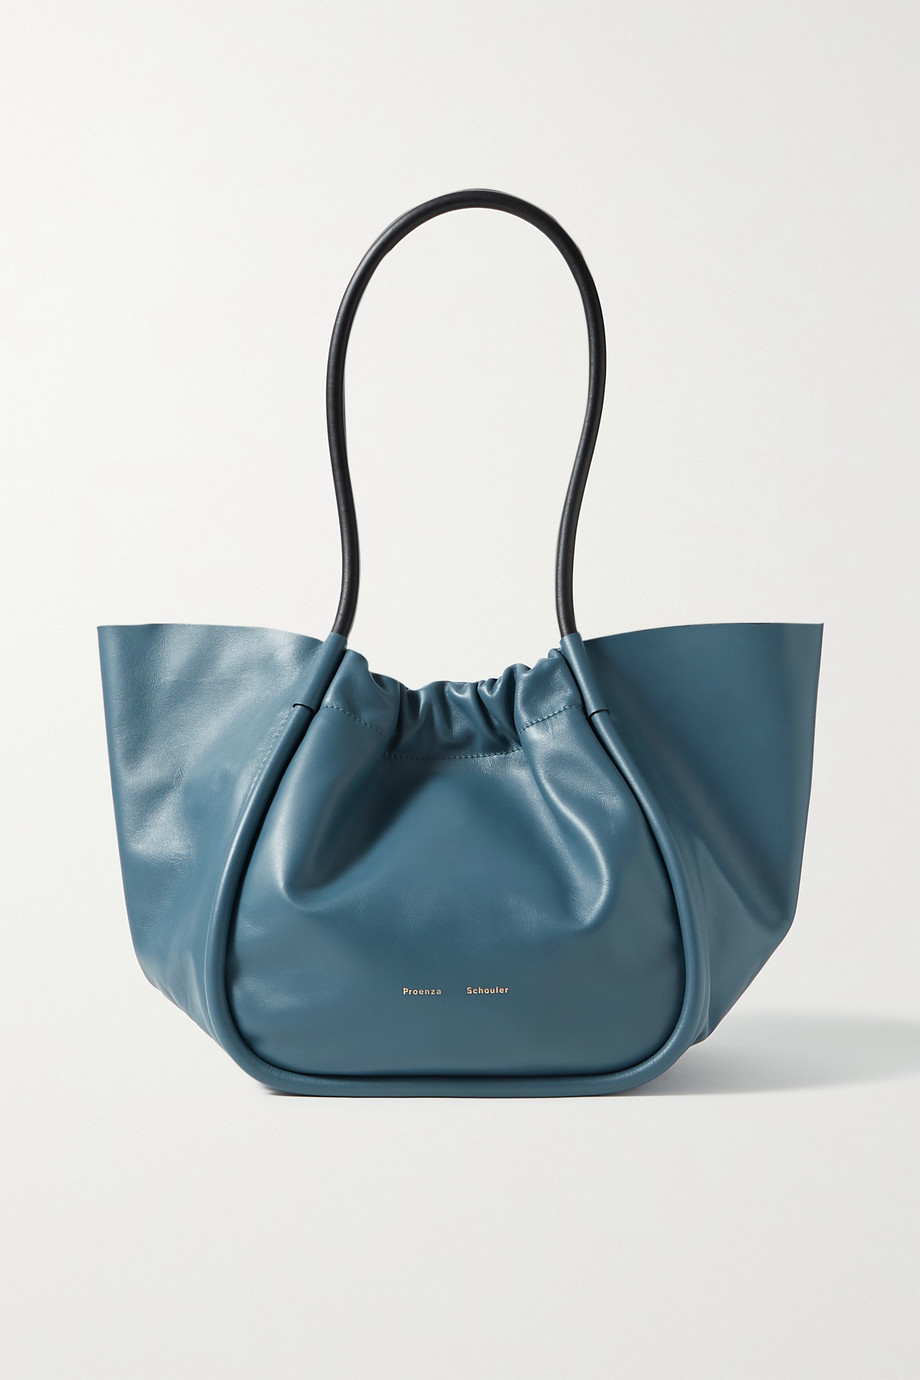 8 Biggest Handbag Trends That Will Dominate 2022 | Who What Wear UK